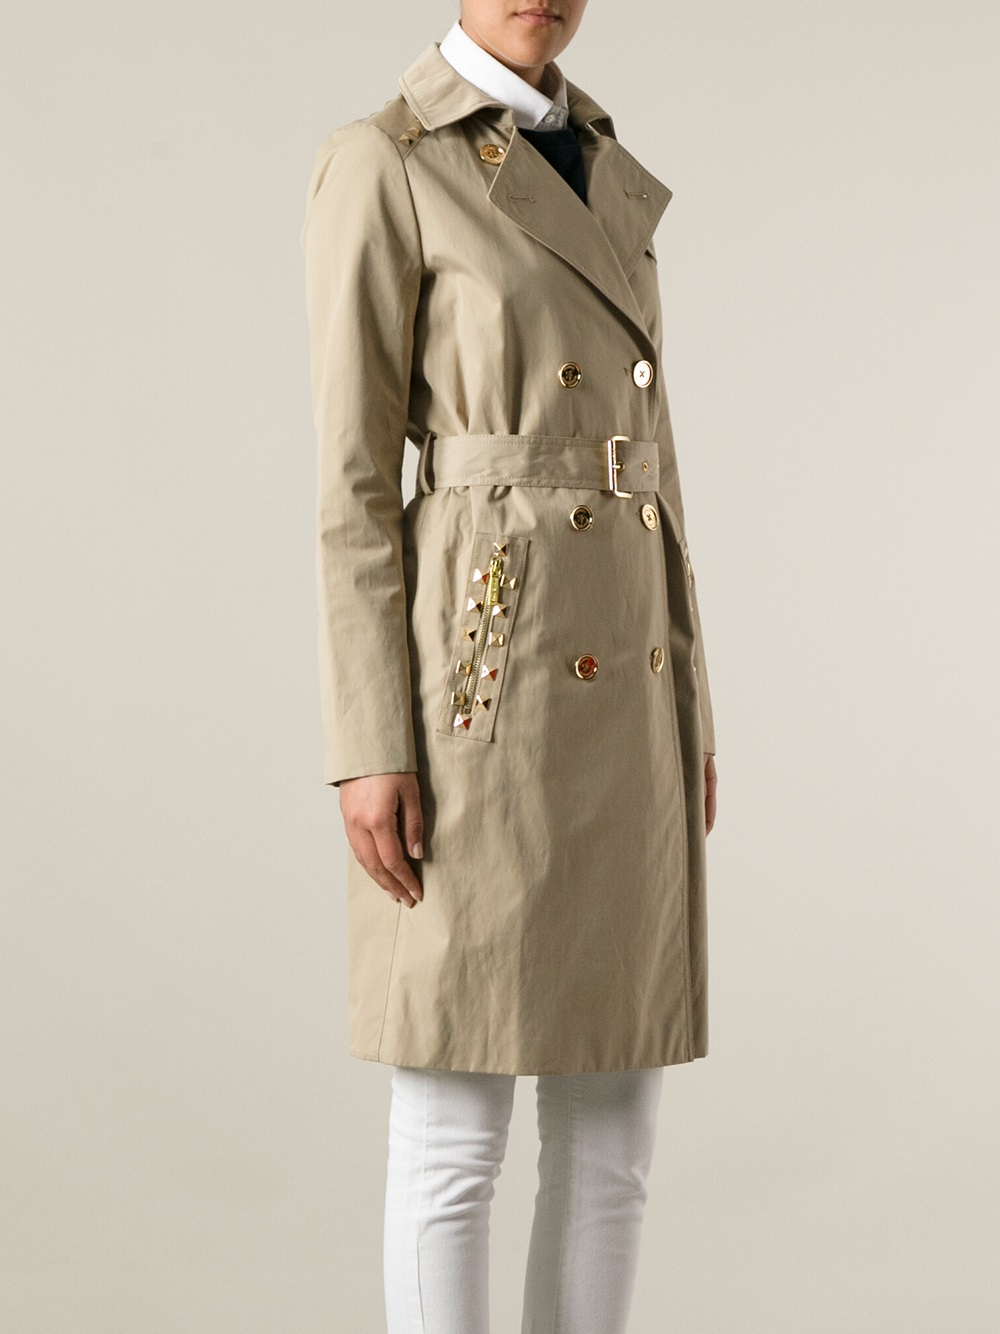 MICHAEL Michael Kors Studded Trench Coat in Natural - Lyst